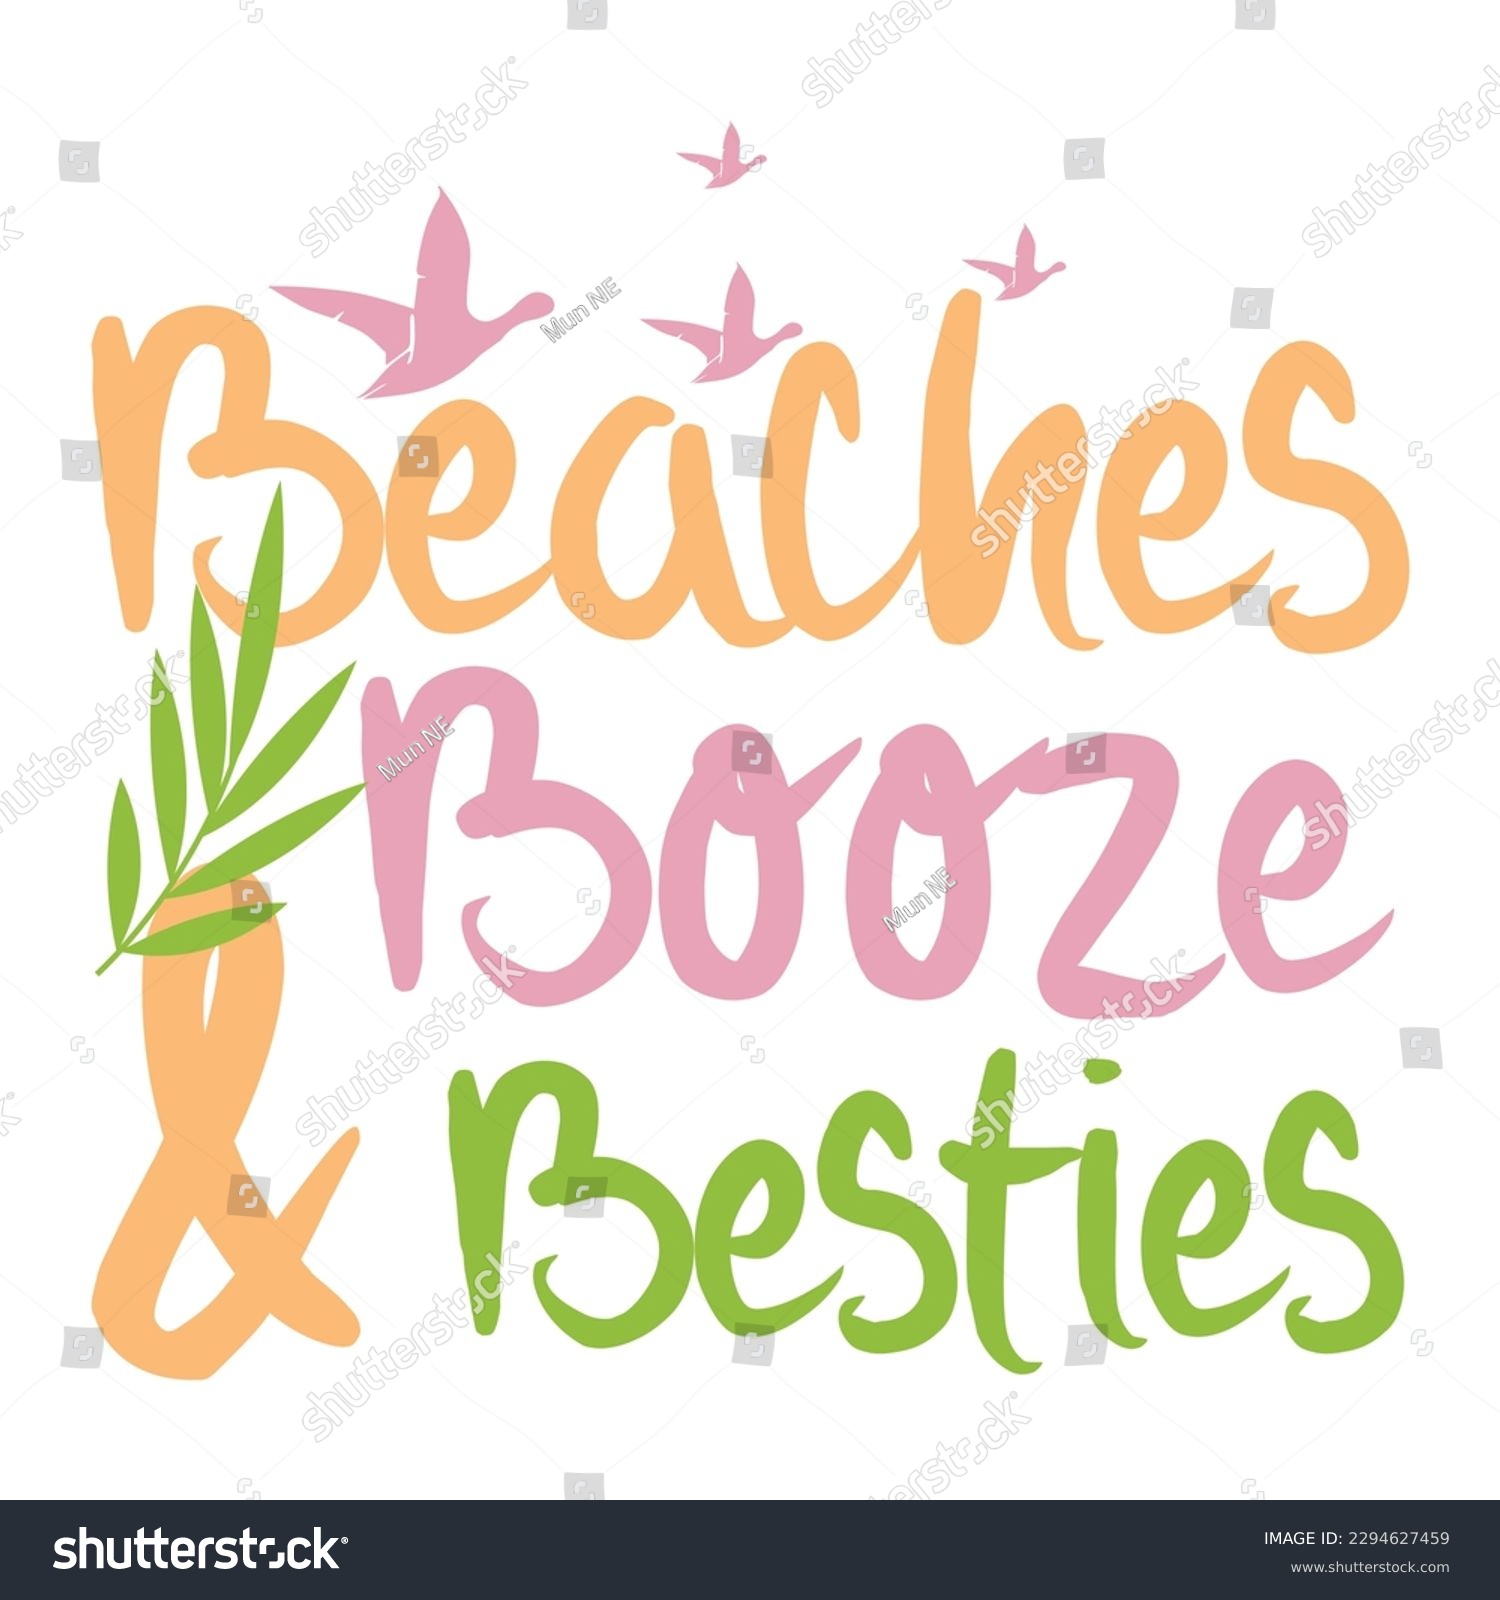 SVG of Beaches booze and besties with bird svg